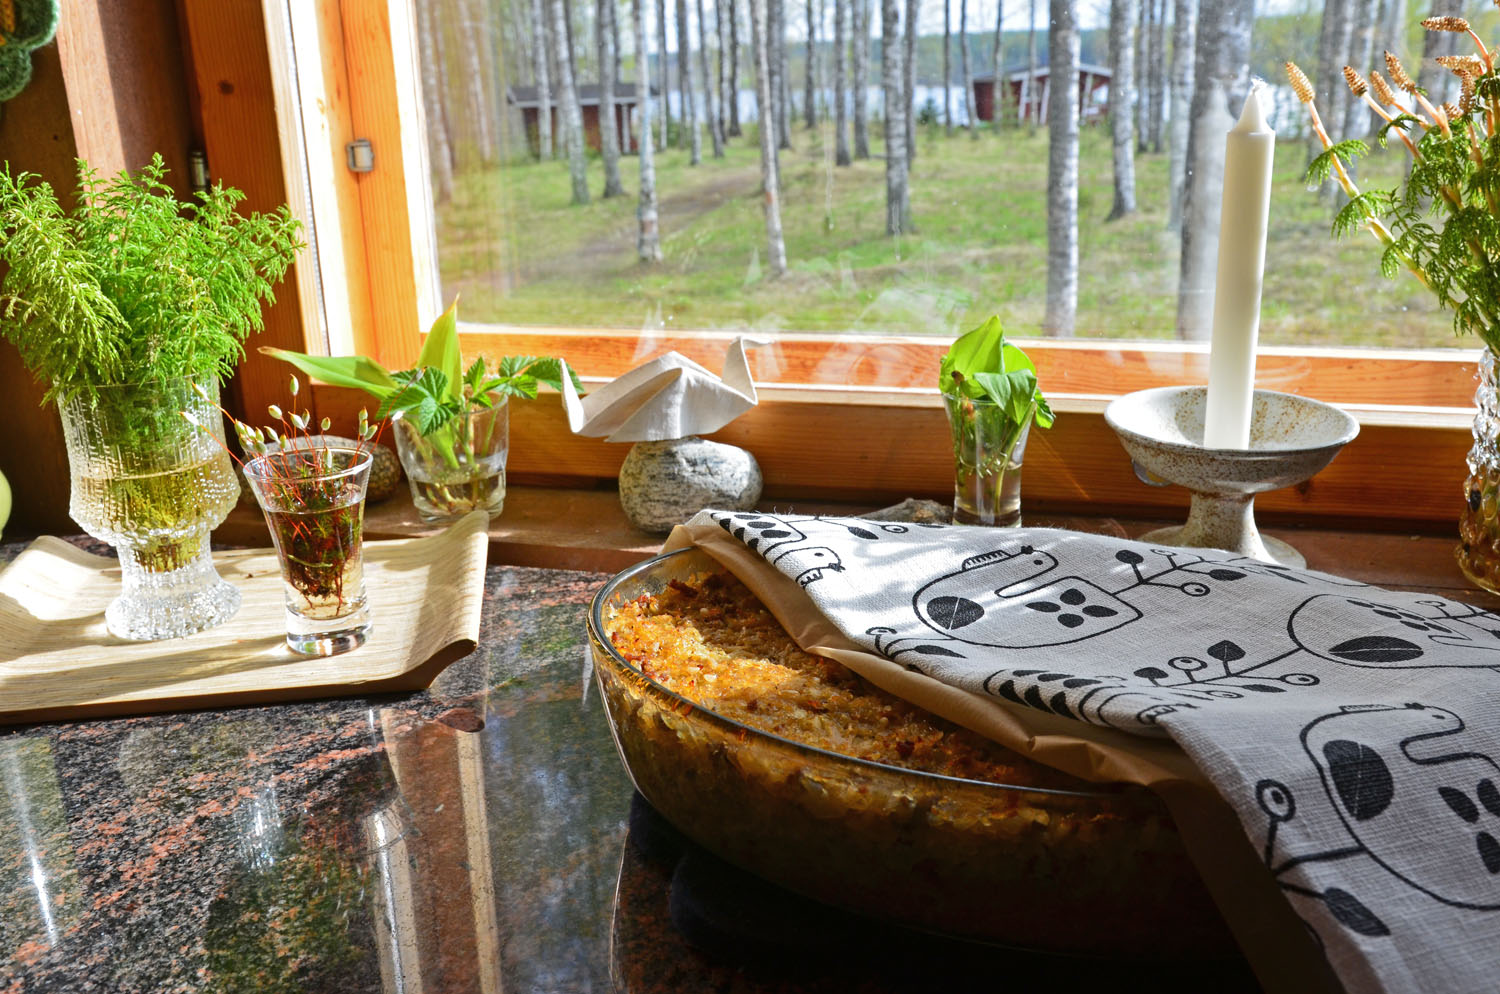 Enjoy traditional Finnish cabbage casserole with your family